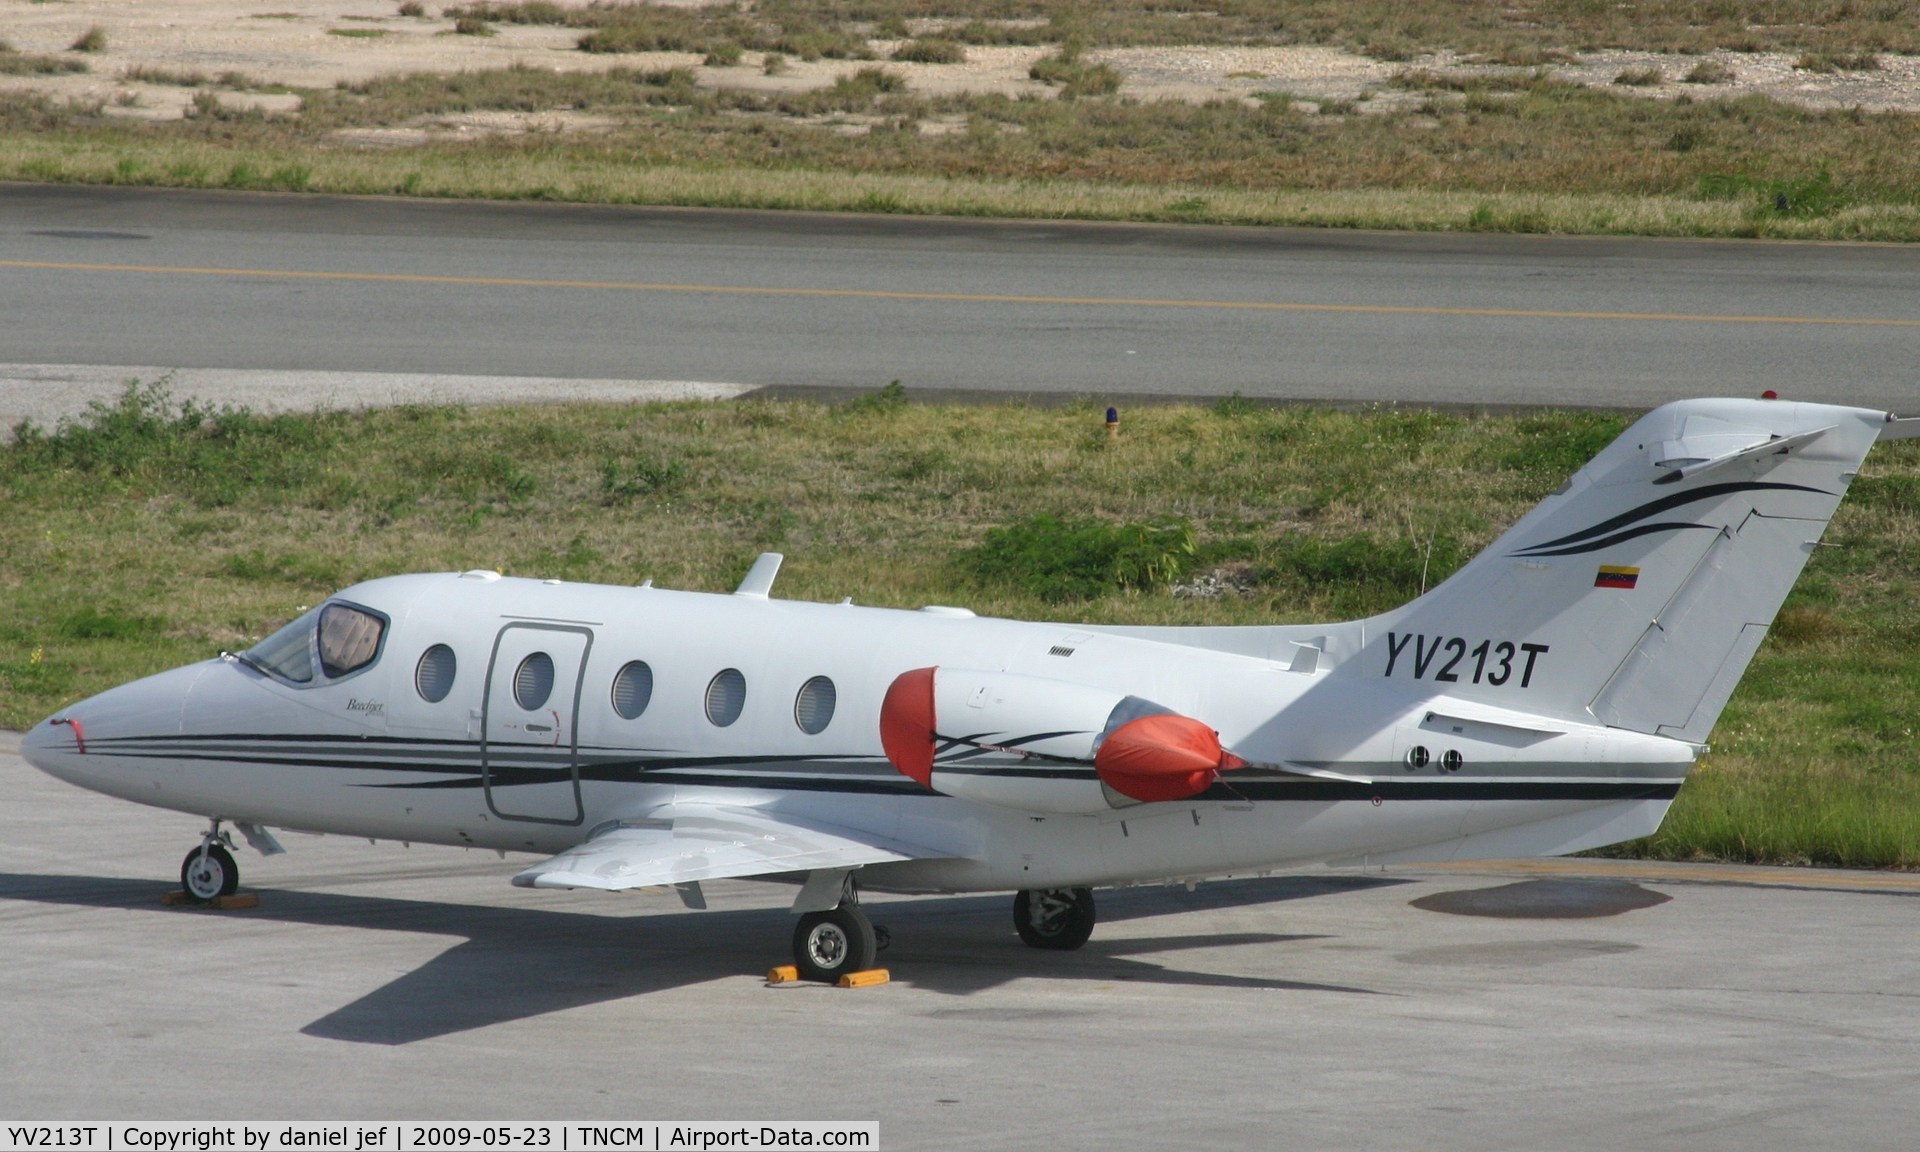 YV213T, 1997 Raytheon Beechjet 400A C/N RK-152, park at the ramp